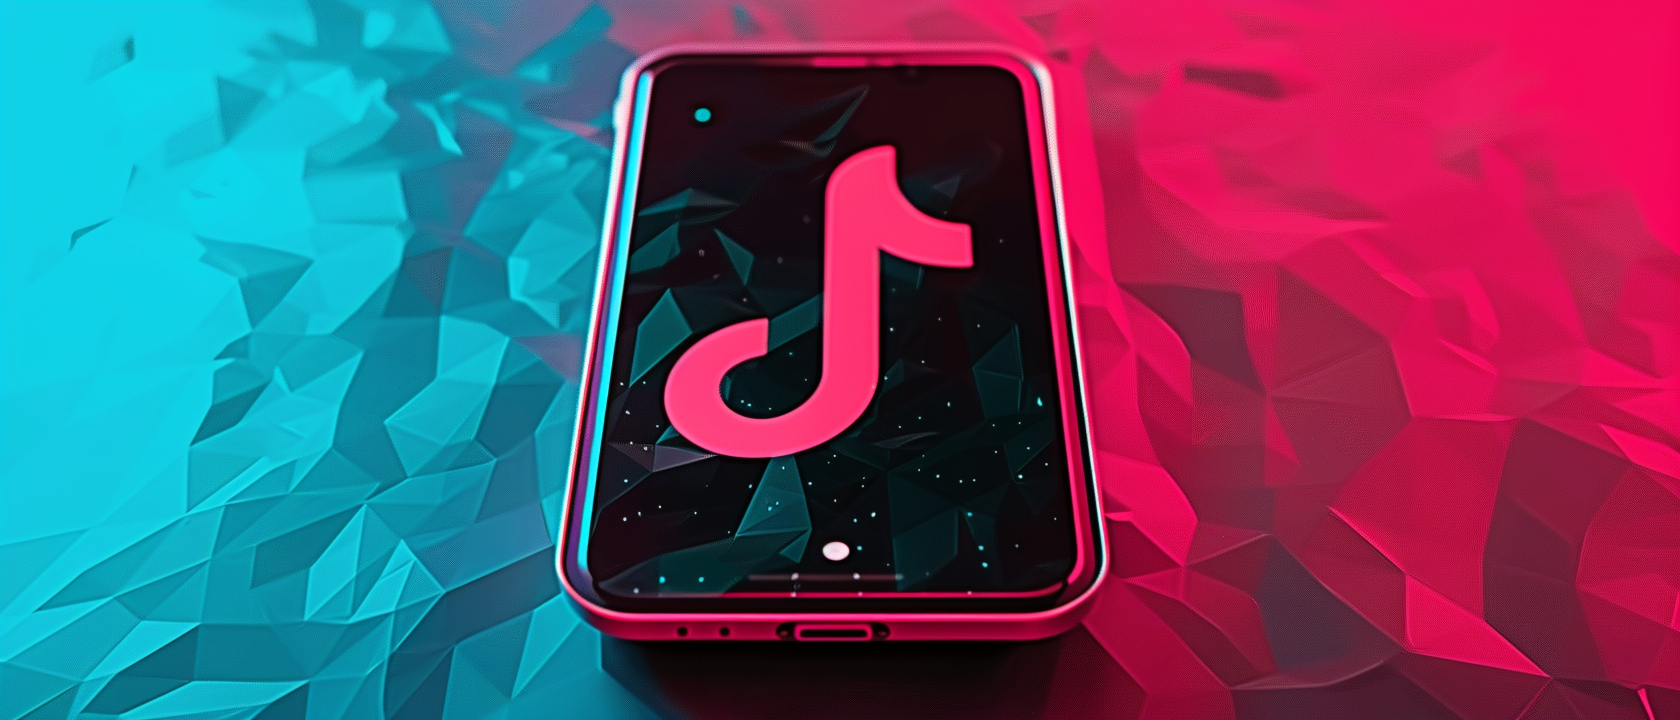 House Votes to Advance Bill Aimed at Nationwide TikTok Ban